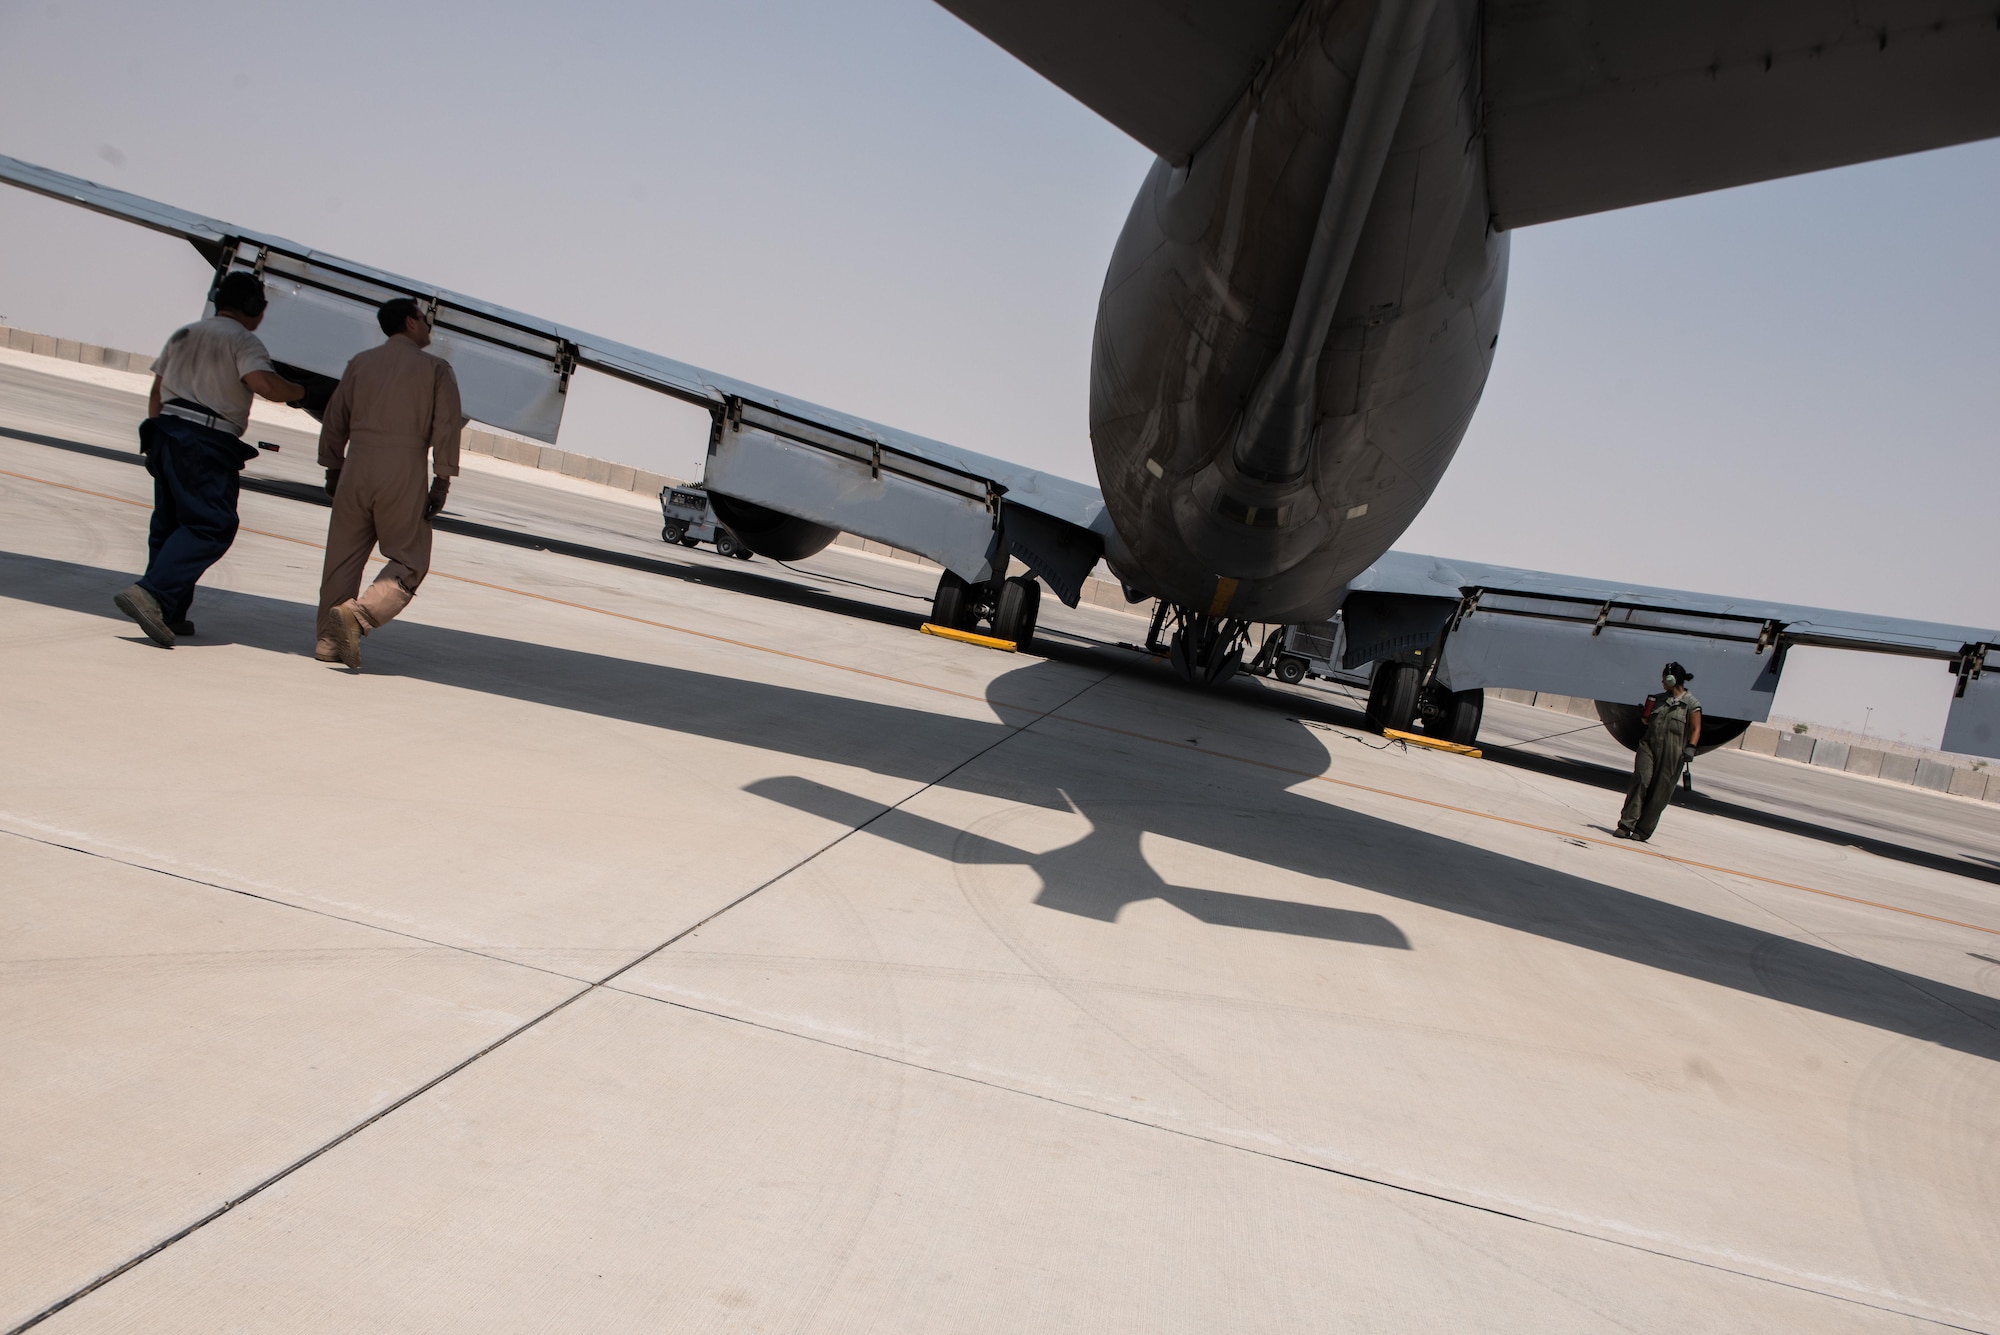 Captain Daniel, 340th Expeditionary Air Refueling Squadron, inspects the exterior of a KC-135 Stratotanker with Senior Airman Edwin Carvajal, 340th Aircraft Maintenance Unit, during final inspections prior to take off September 16, 2015 at Al Udeid Air Base, Qatar. (U.S. Air Force photo/Staff Sgt. Alexandre Montes)